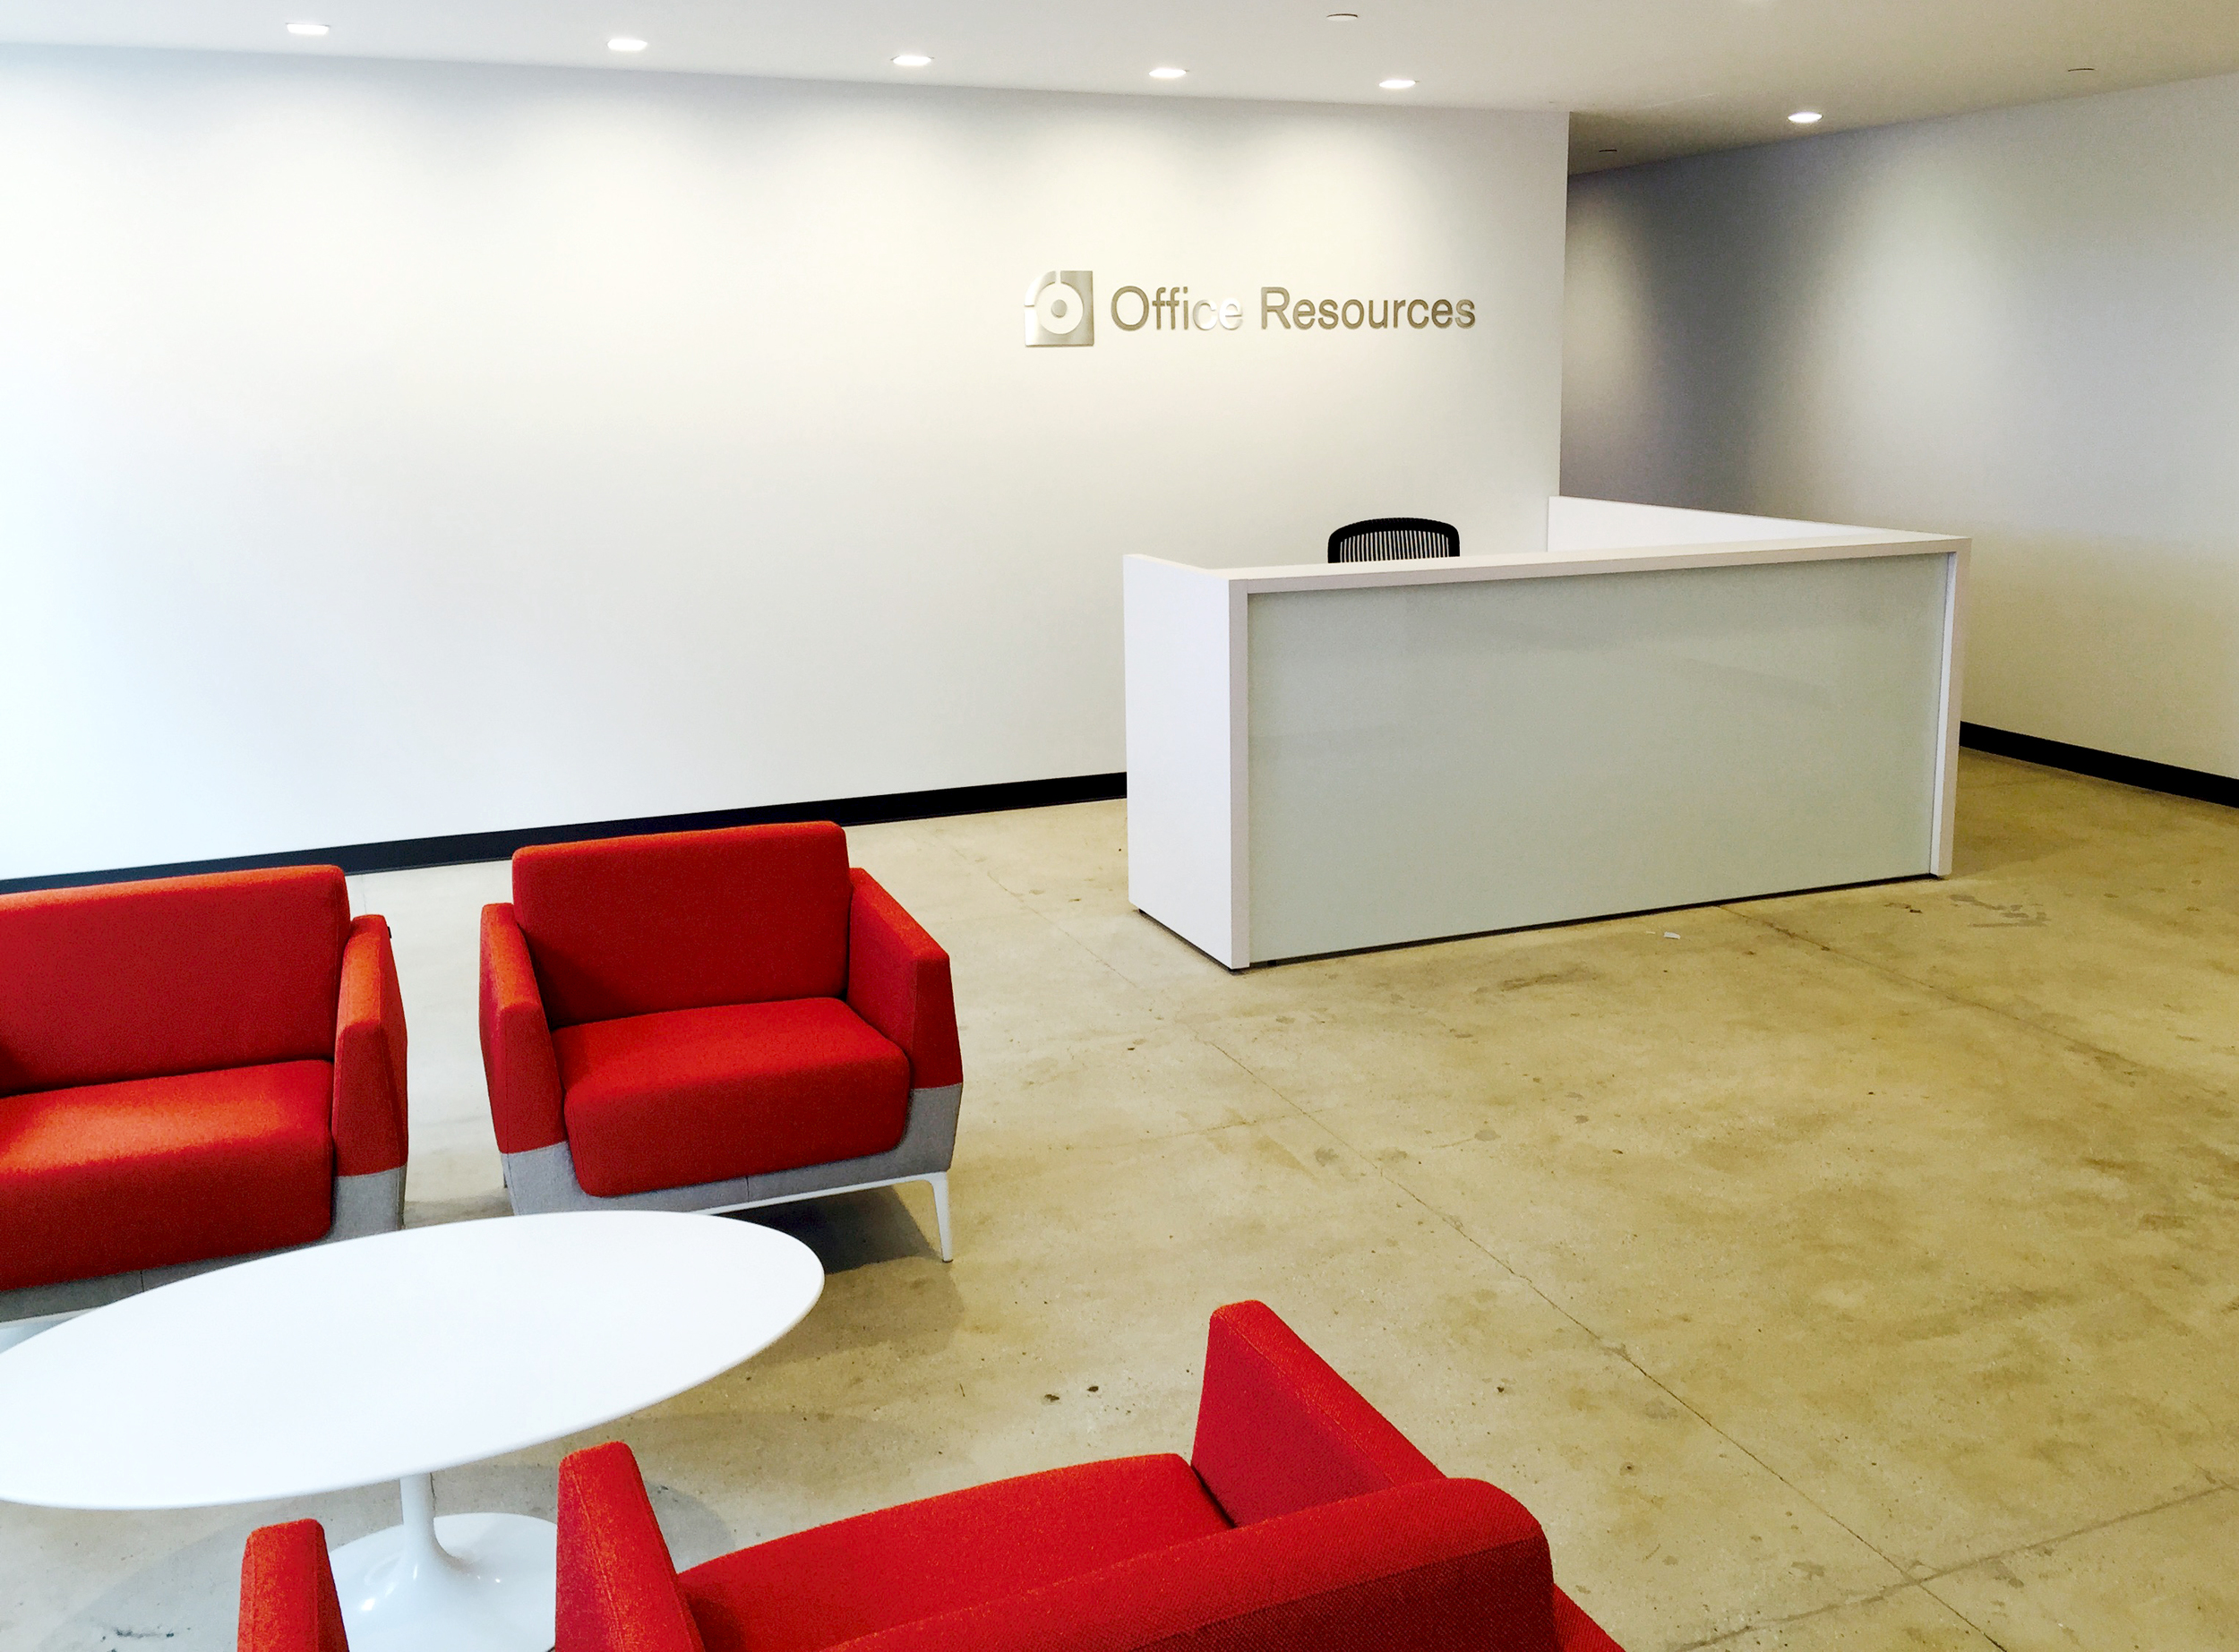 New York City Office Resources Inc